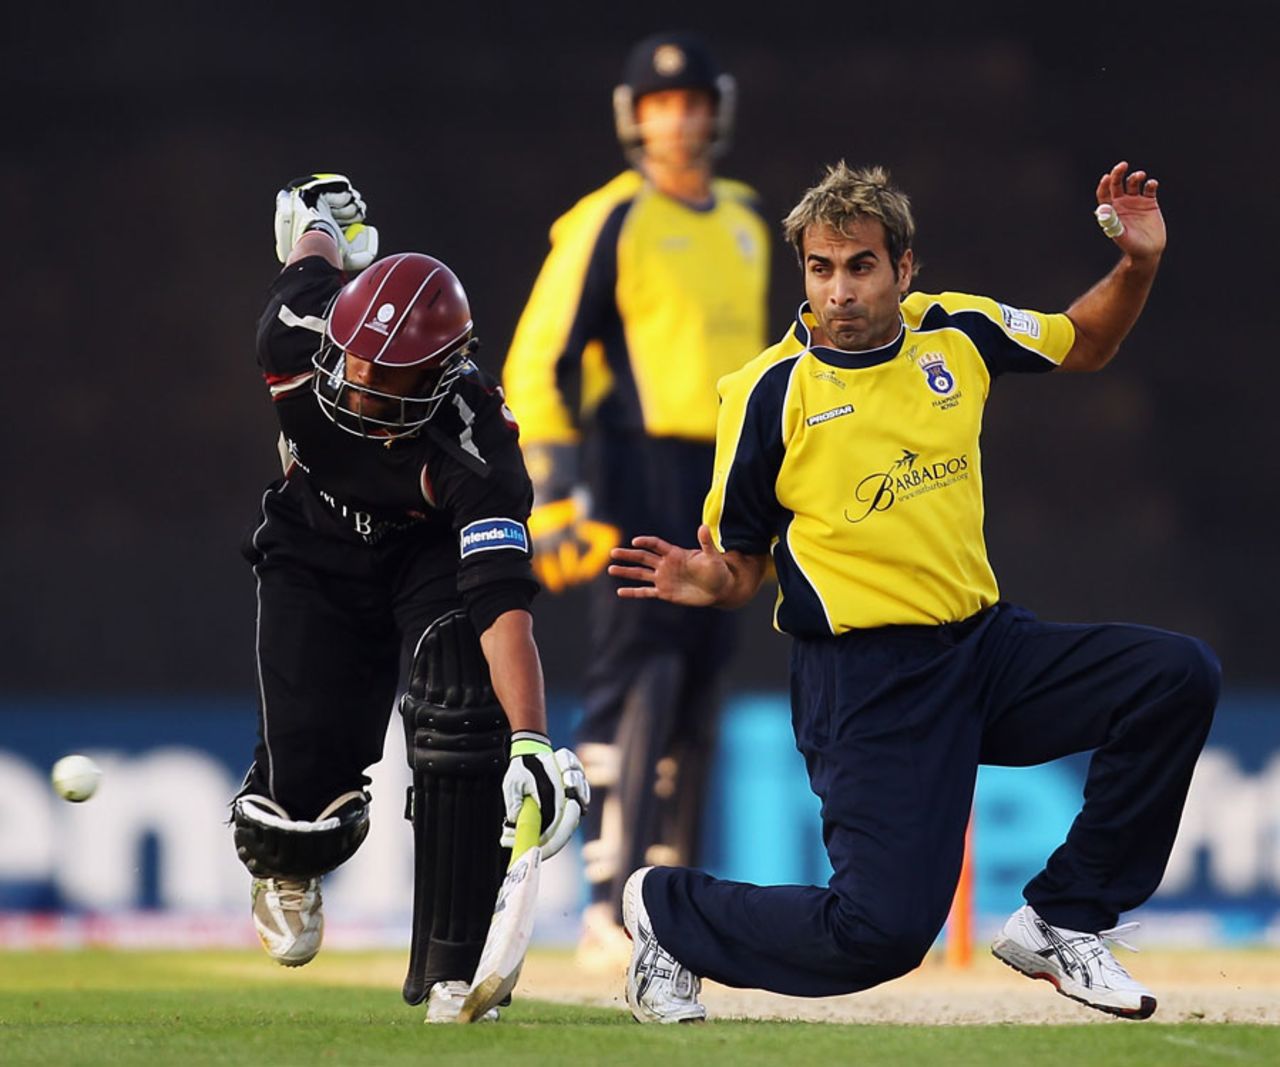 Imran Tahir avoids a collision with Arul Suppiah, Hampshire v Somerset, South group, Friends Life t20, Rose Bowl, June 1, 2011